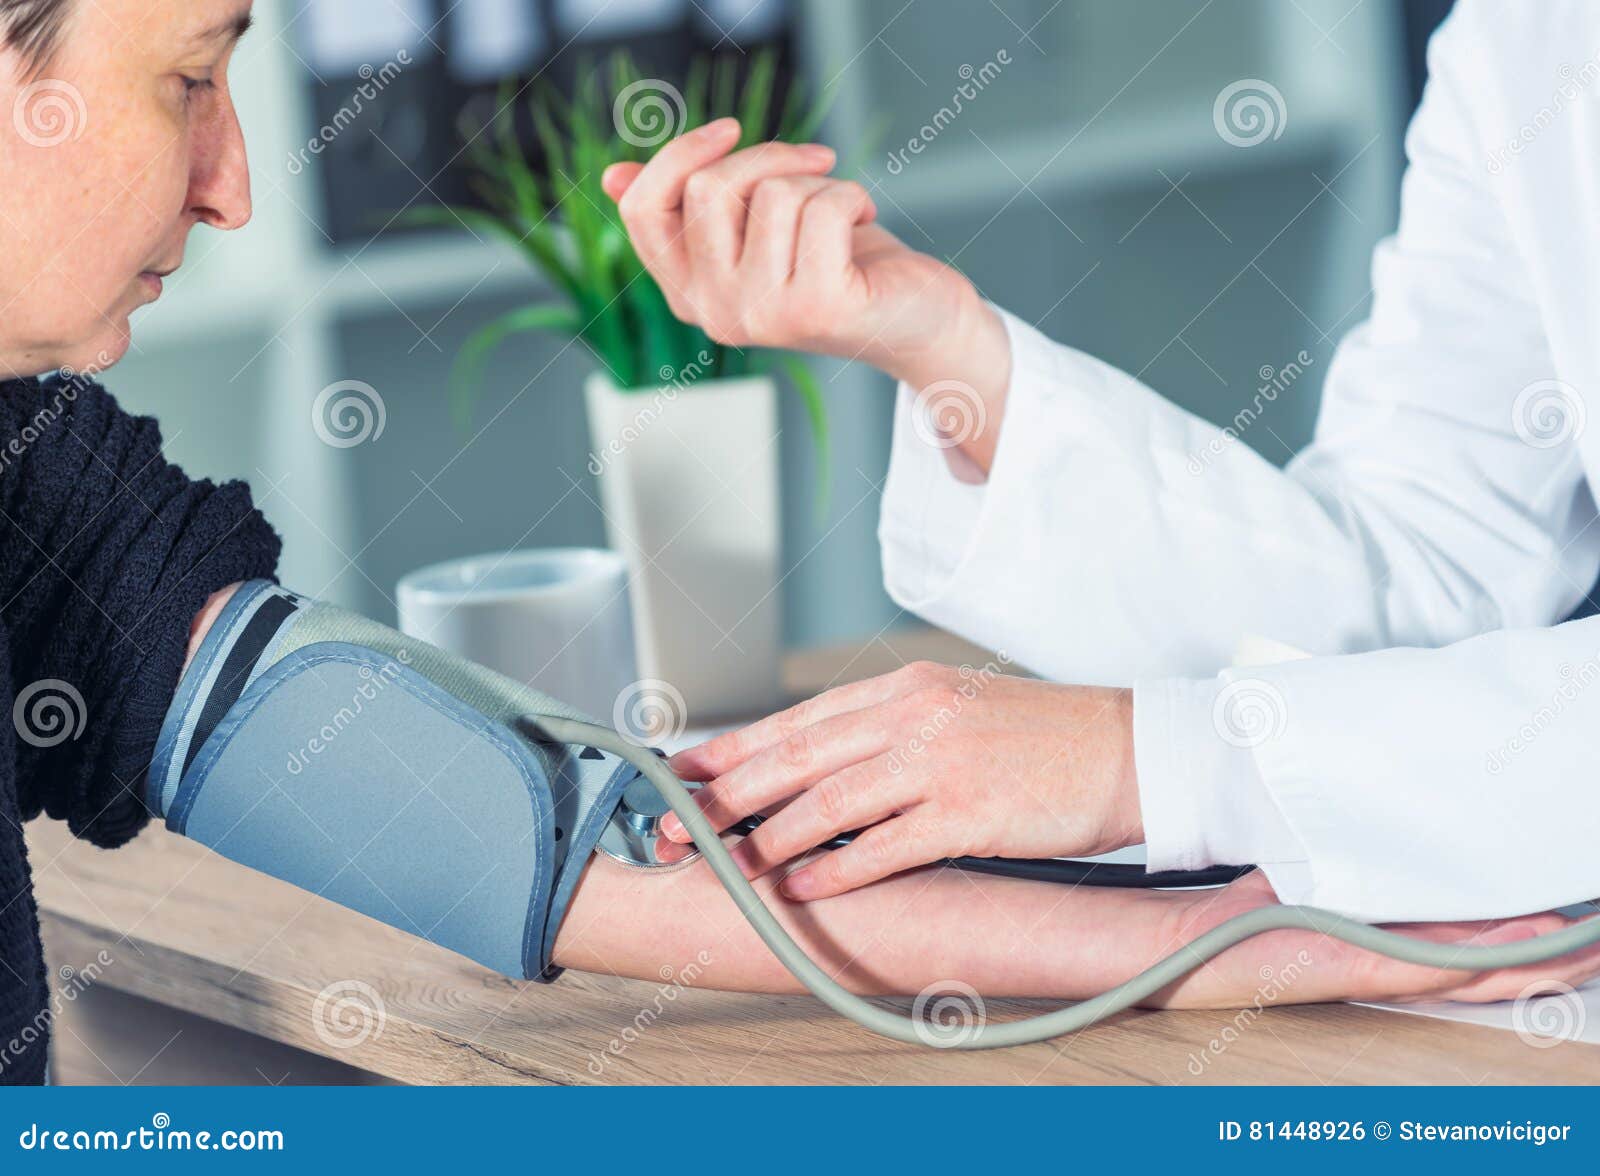 doctor cardiologist measuring blood pressure of female patient